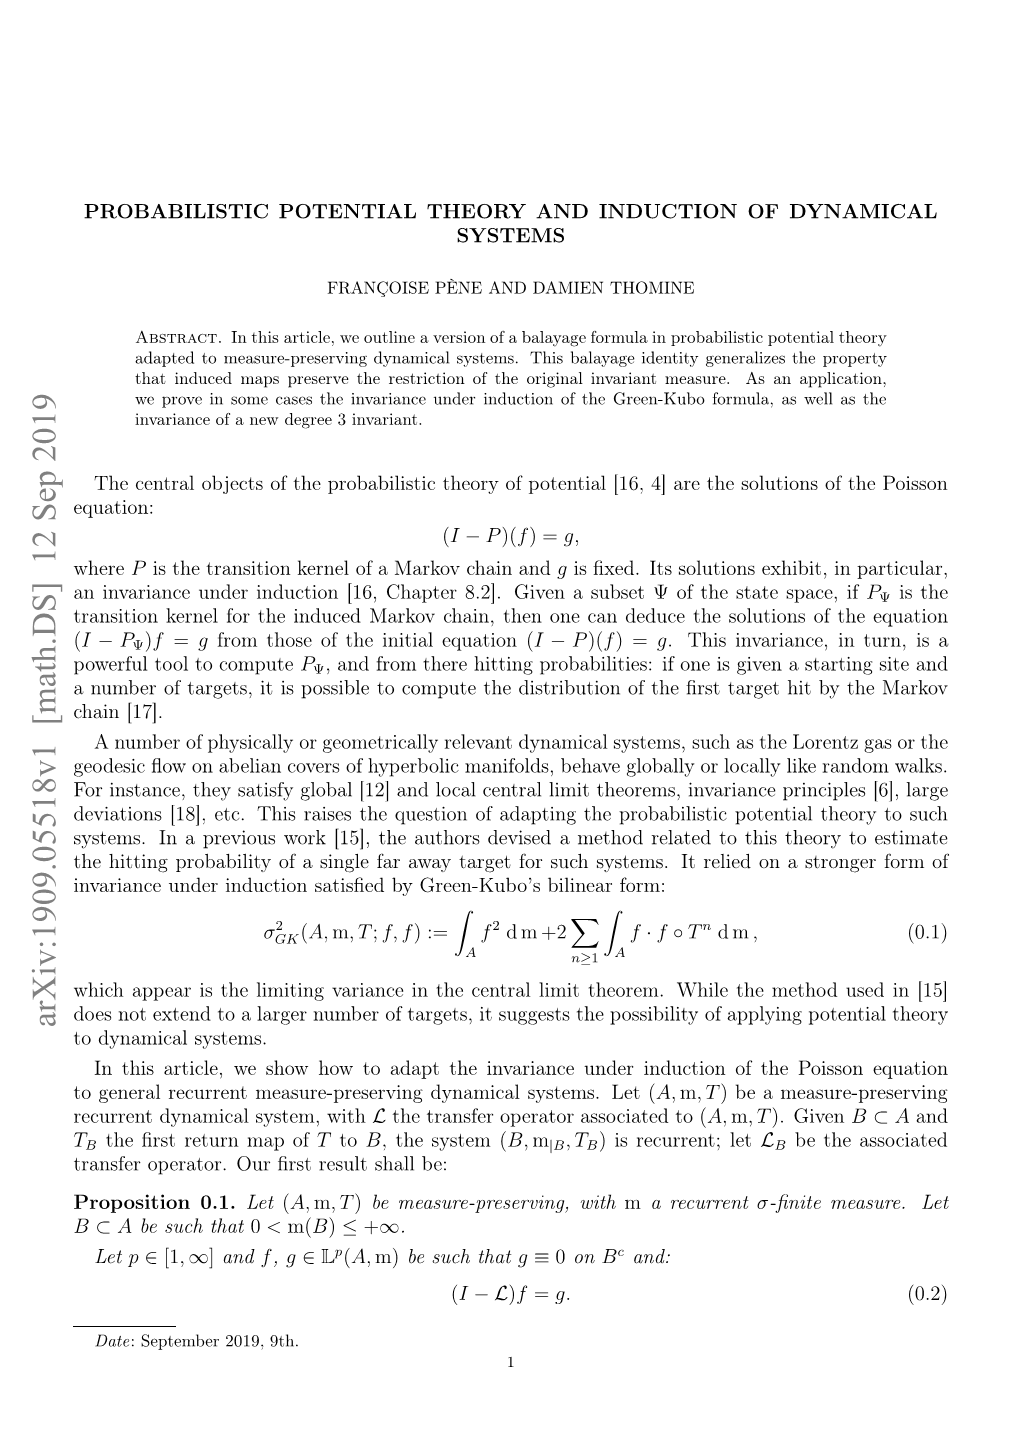 Probabilistic Potential Theory and Induction of Dynamical Systems 2